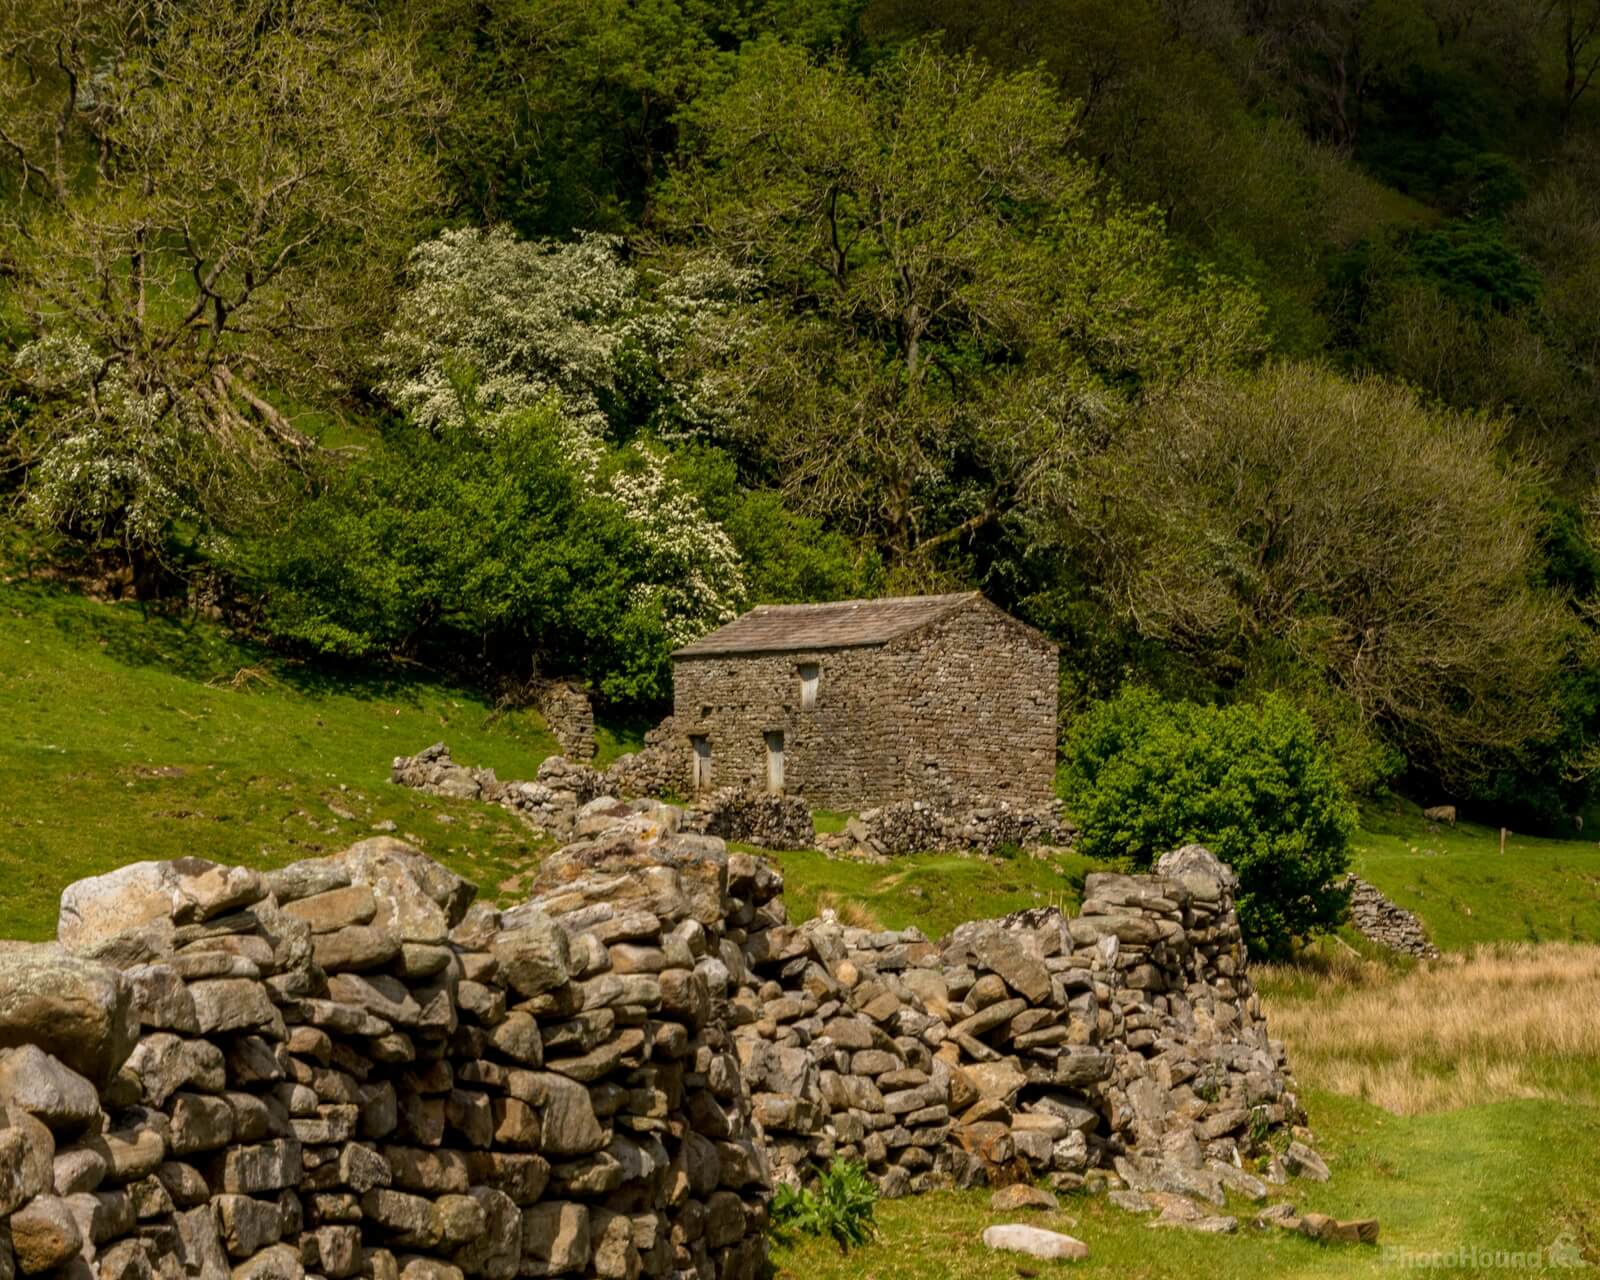 Image of Muker Meadows, Swaledale by Andy Killingbeck